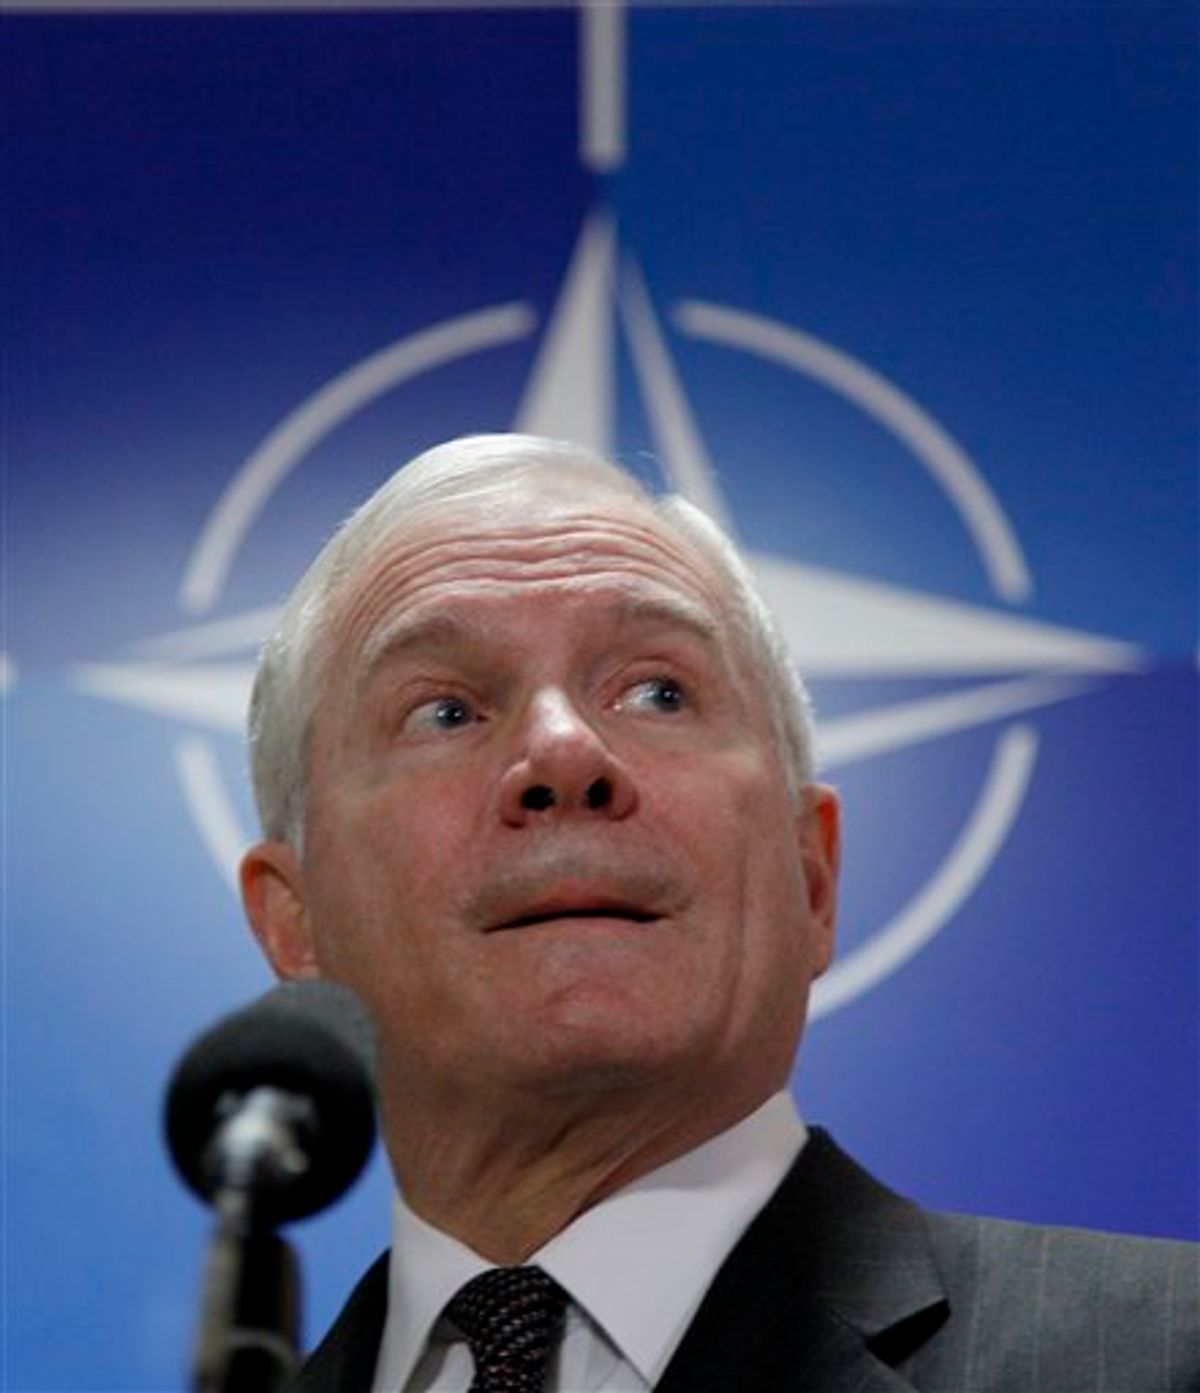 U.S. Defense Secretary Robert Gates speaks with the media after a meeting of NATO defense ministers at NATO headquarters on Thursday, March 10, 2011. NATO says it has started round-the-clock surveillance of the air space over Libya, where government jets have been pounding rebel positions in an effort to defeat an uprising. (AP Photo/Virginia Mayo) (AP)